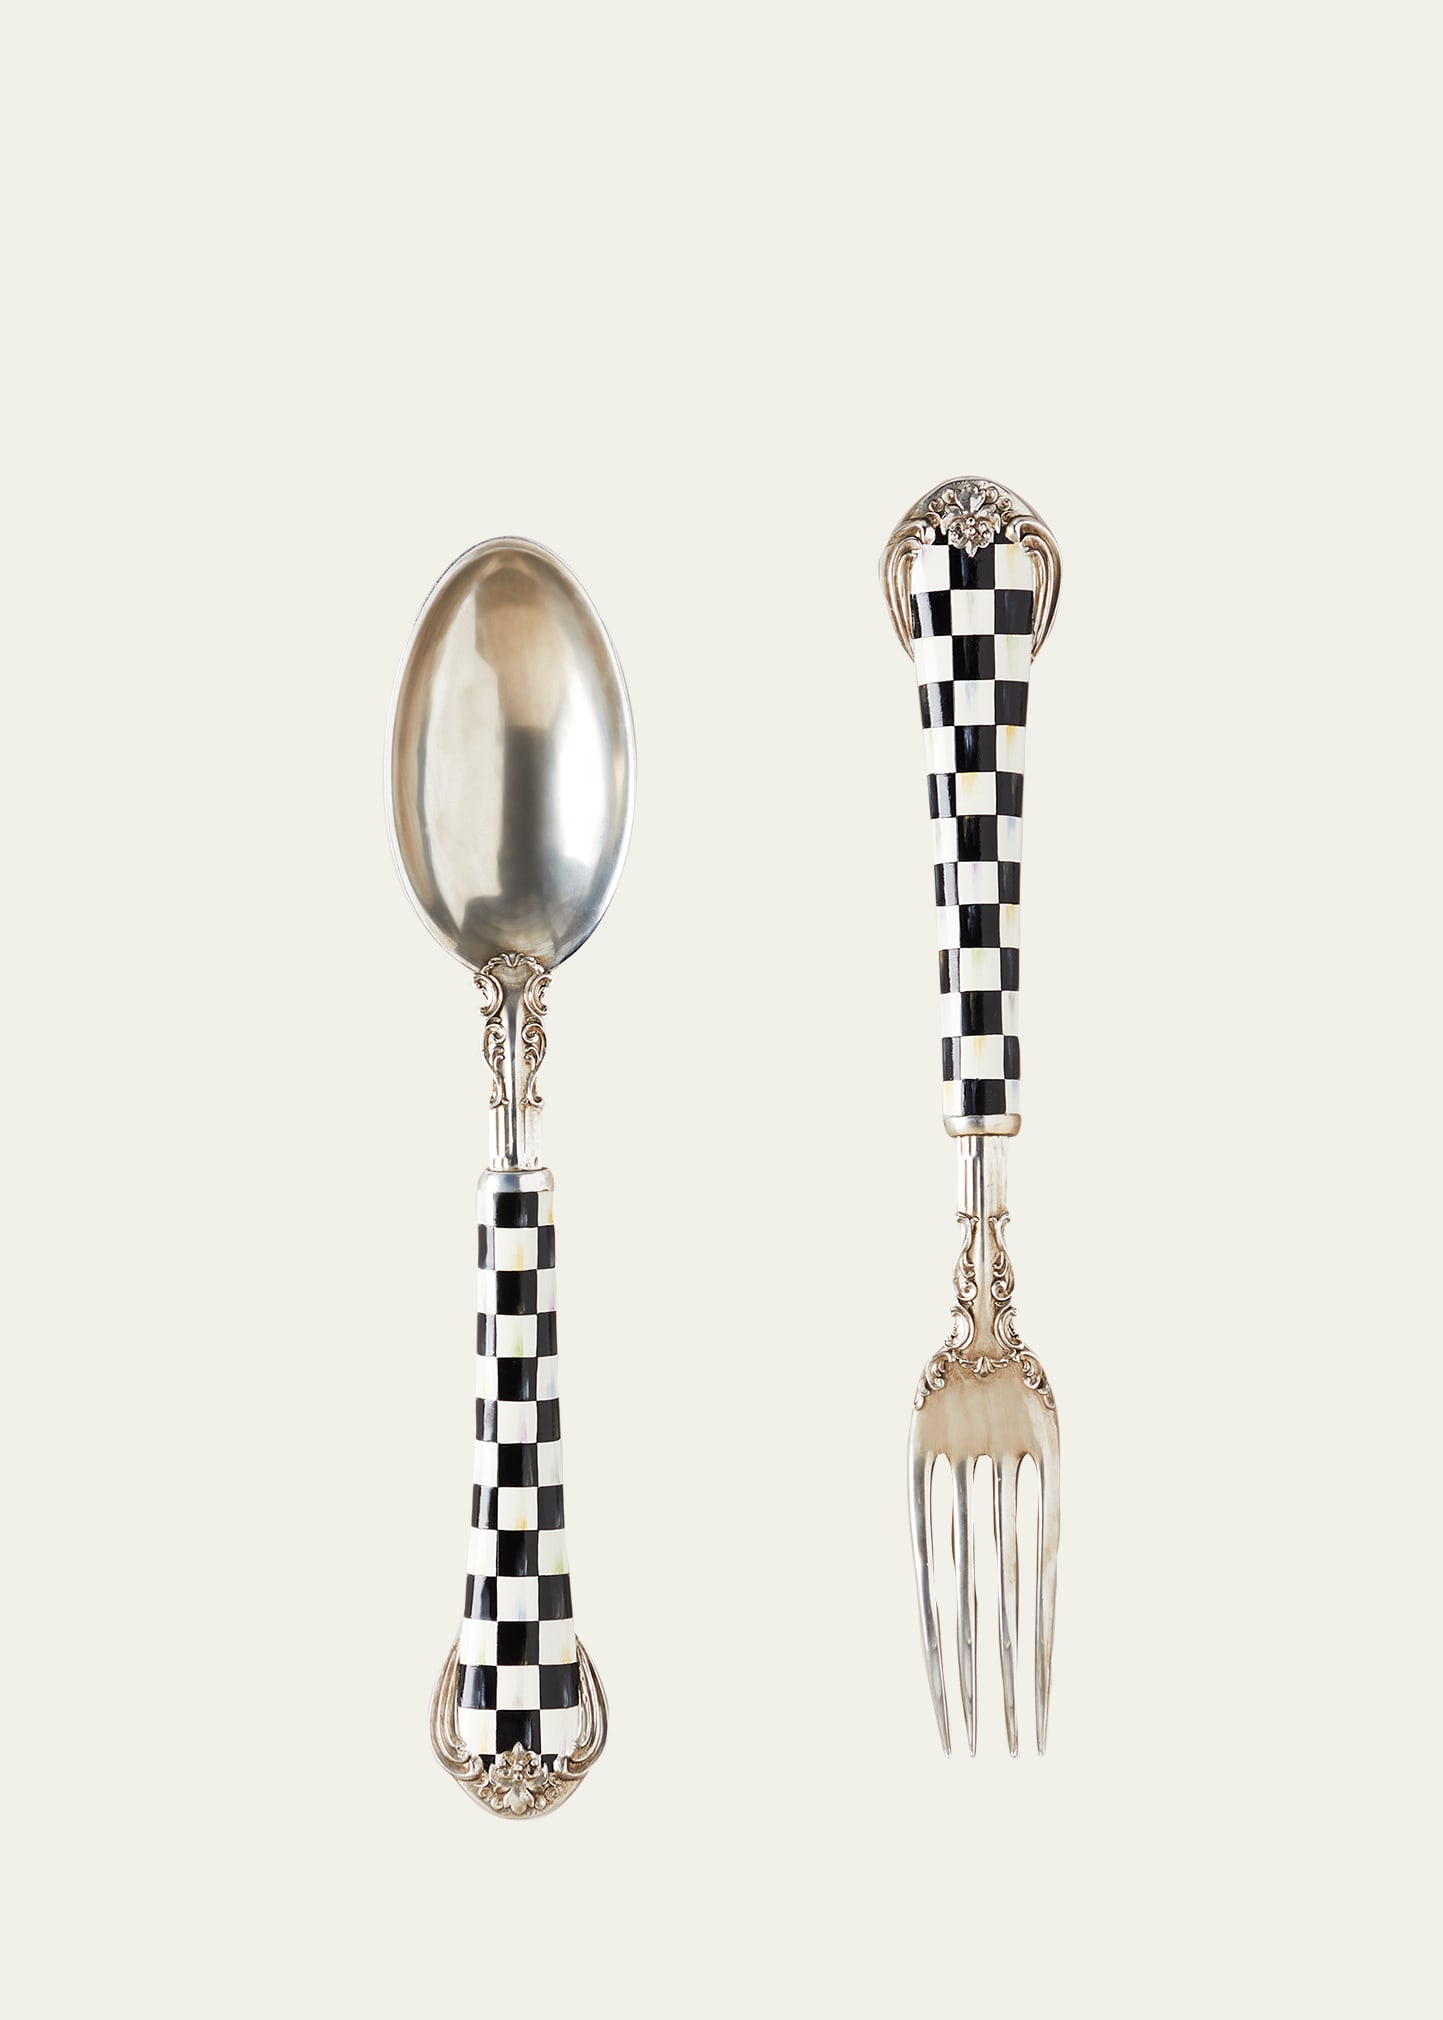 Mackenzie-childs Courtly Check Spoon Fork In Multi